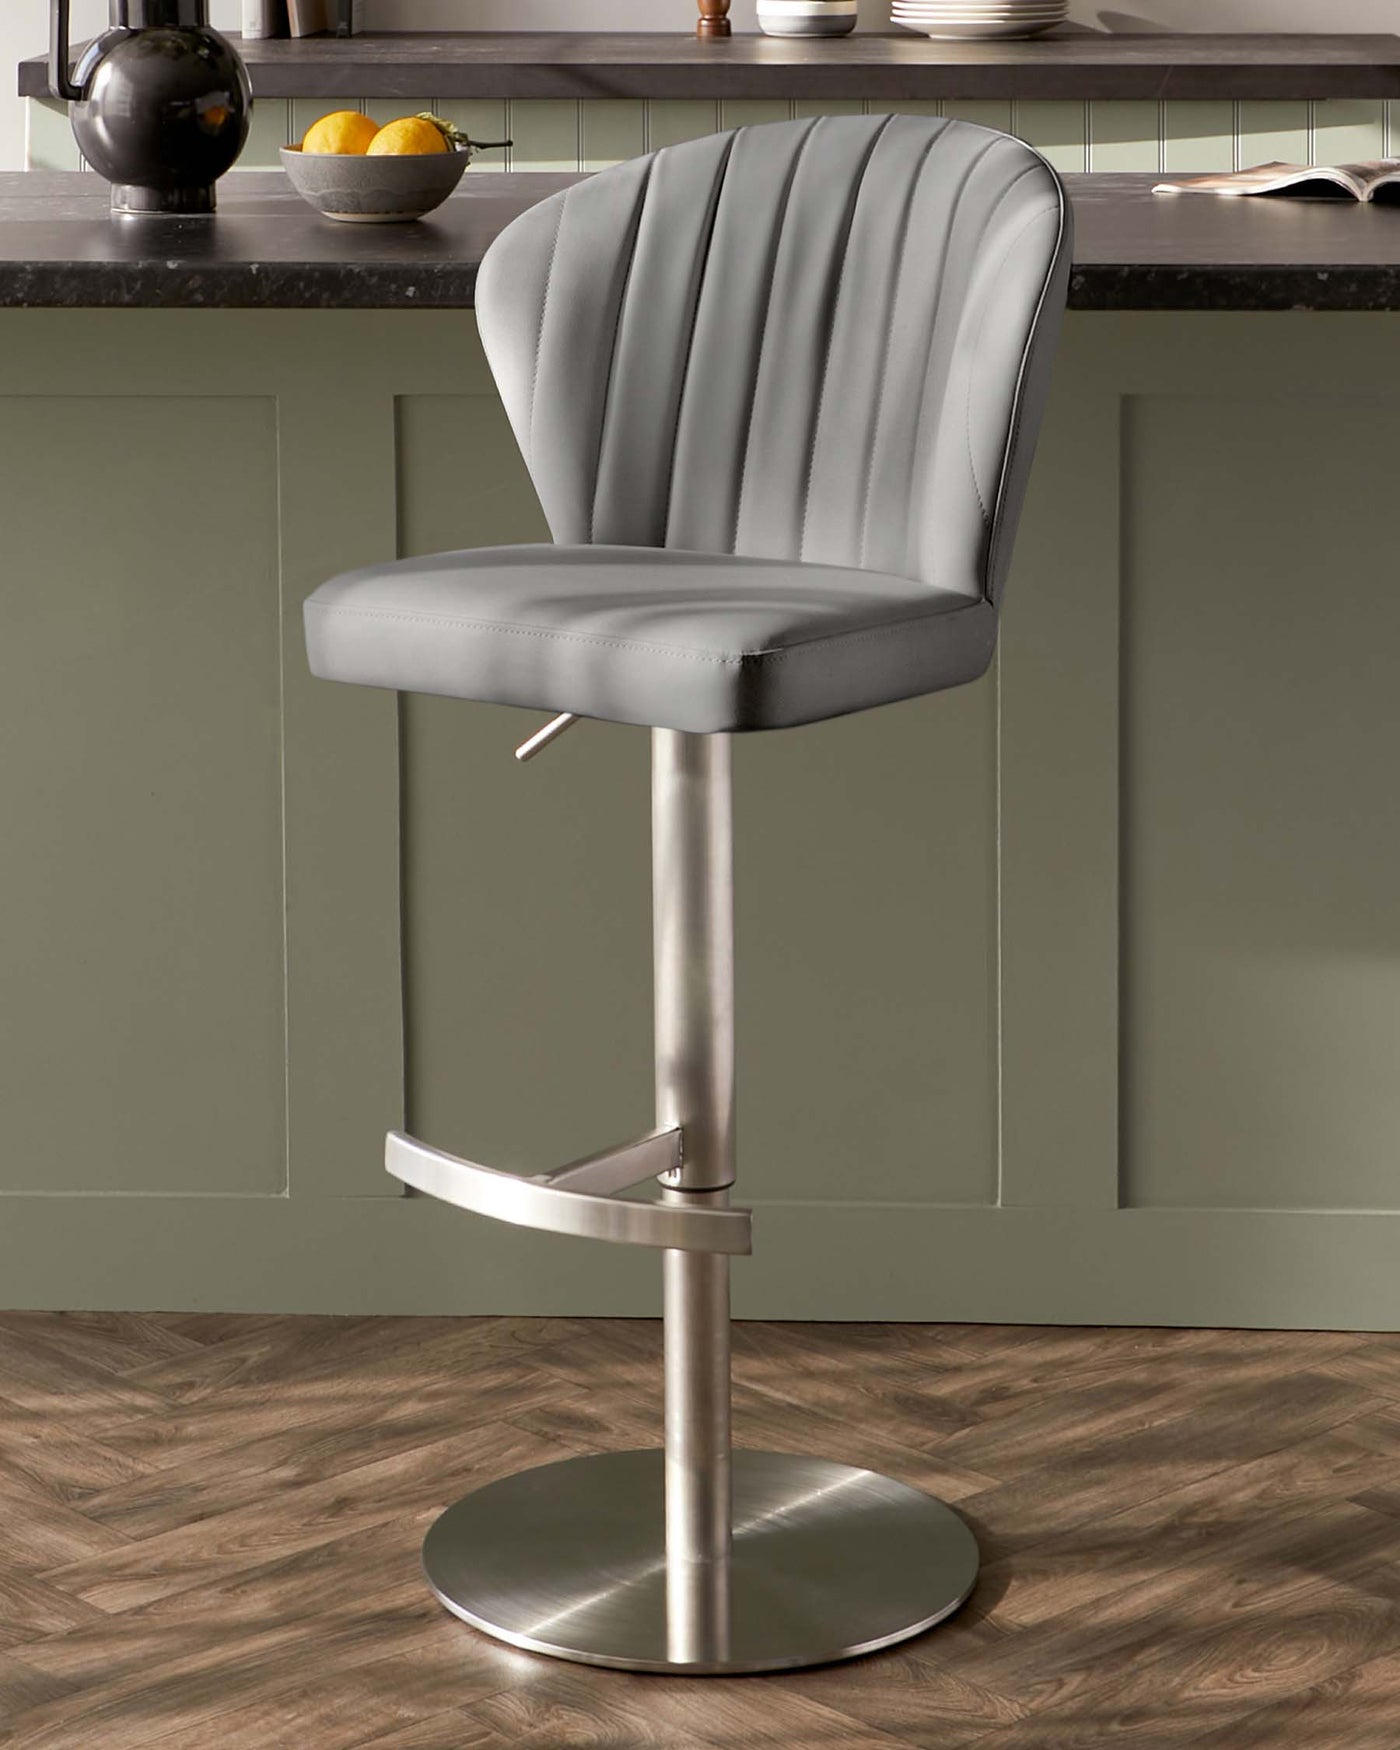 Modern grey upholstered bar stool with vertical channel tufting, a curved backrest, built-in footrest, and an adjustable height lever under the seat, set on a circular chrome base.